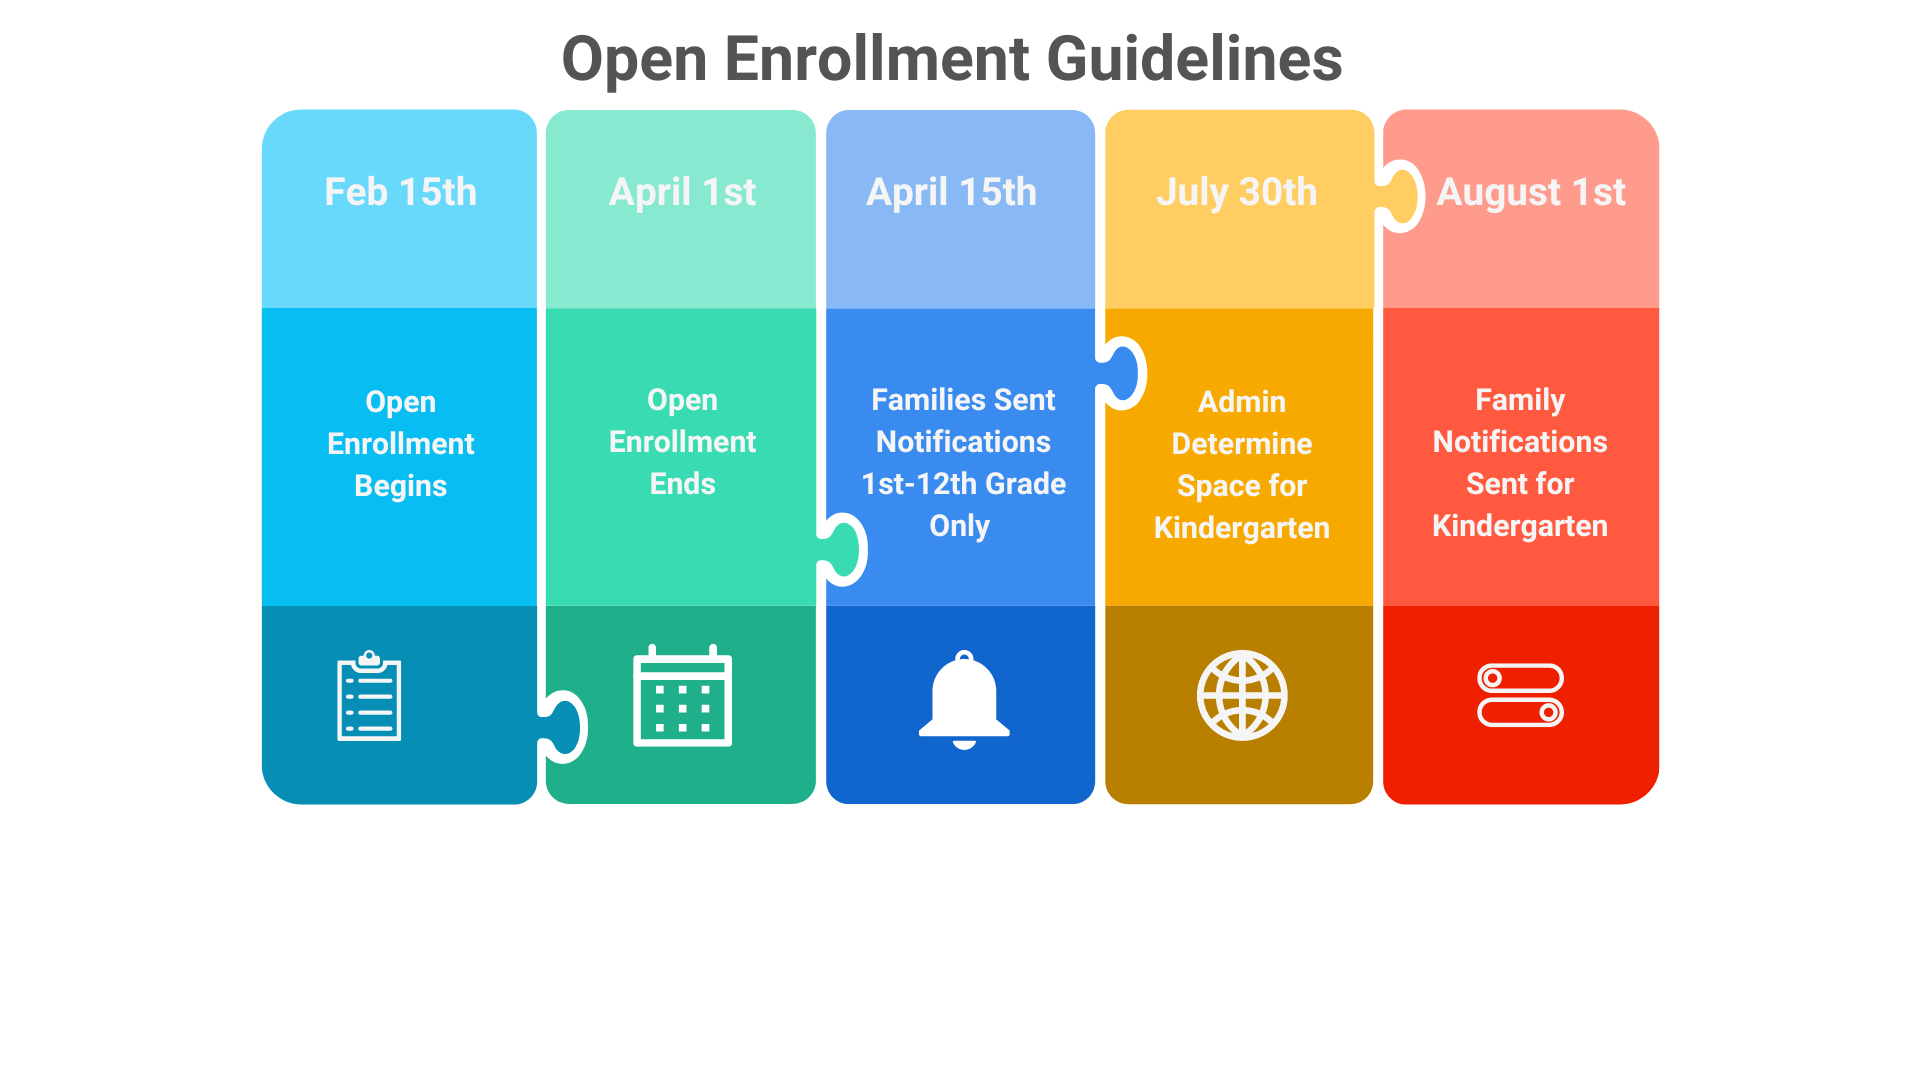 Open enrôlement process graphic. The graphic describes the administrative guidelines that district follows. families must apply by April 1st for open enrollment. Families will then be notified by April 15th if the applications have been accepted. 